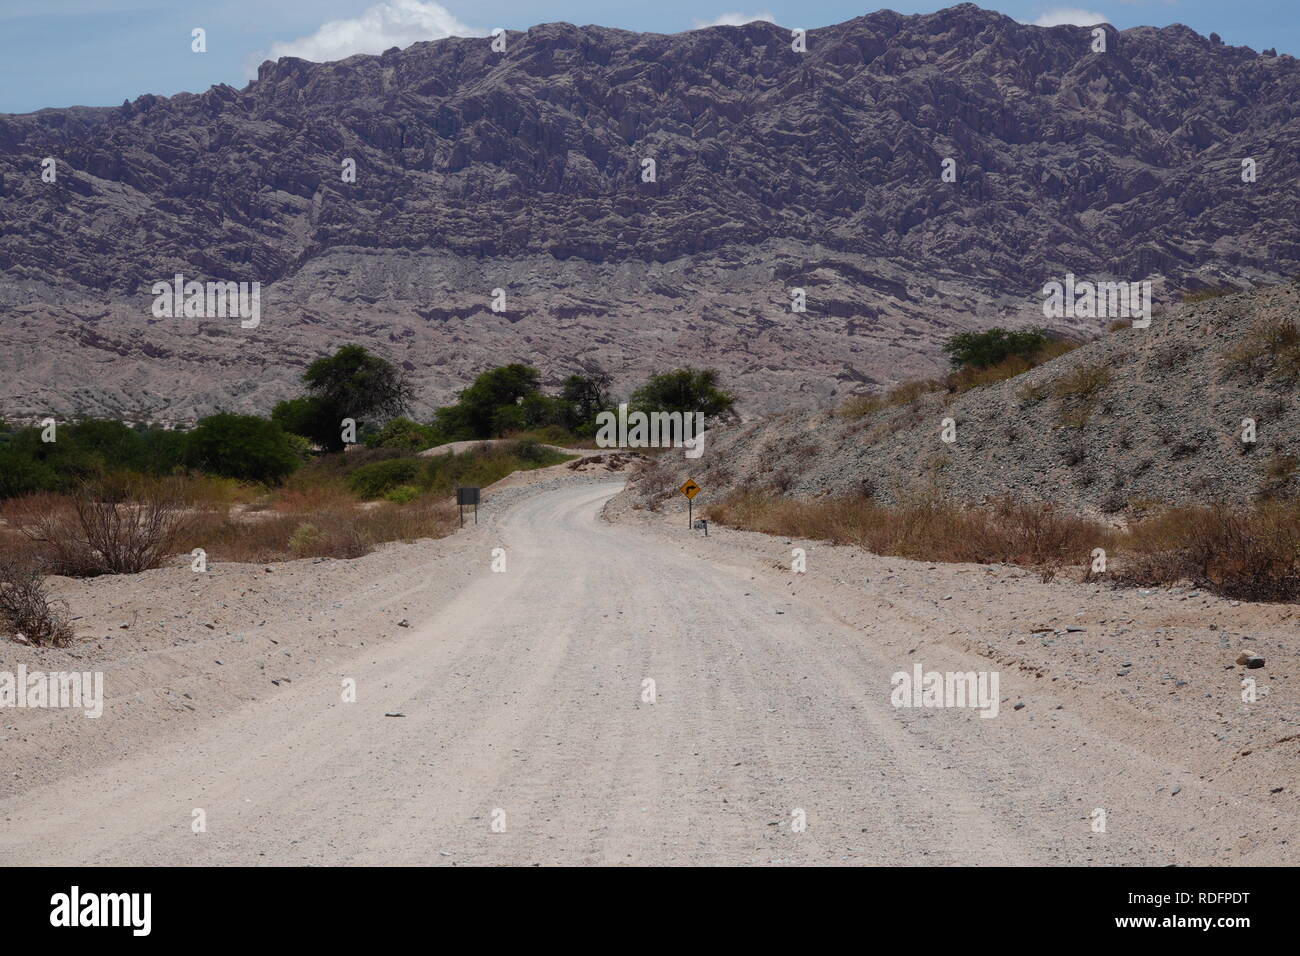 Approaching the quebrada de las flechas (Valley of Arrows) on the RN40 road between Cachi and Cafayate made famous by Che Guevara's Motorcycle Diaries. Stock Photo